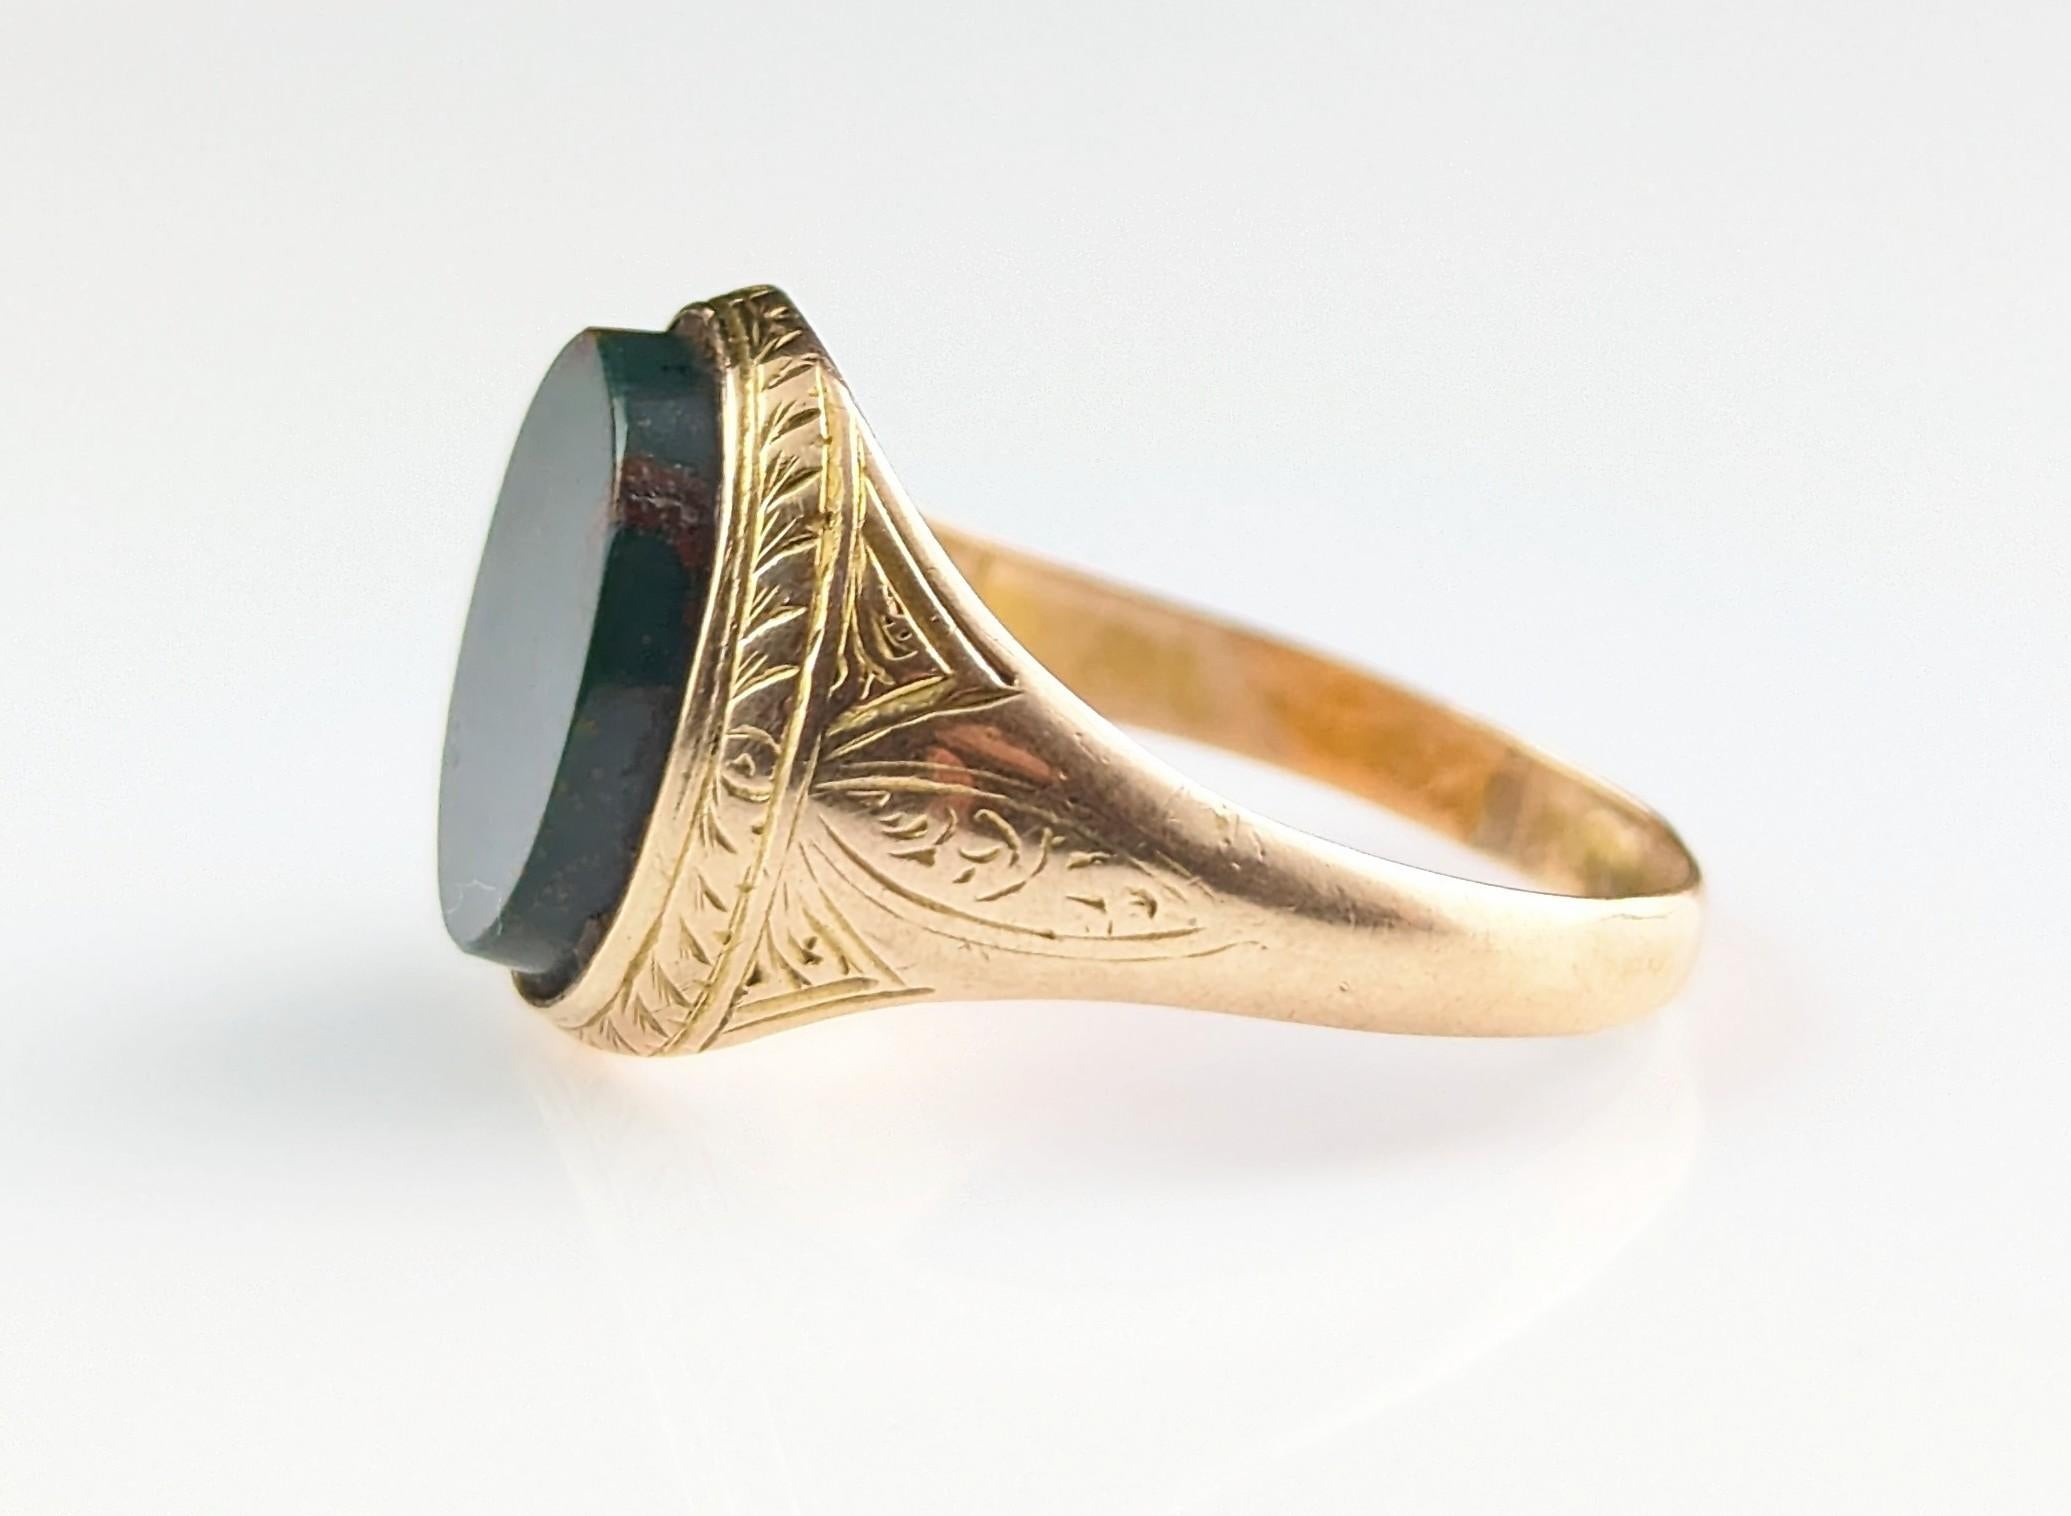 Antique Bloodstone Signet Ring, 15k Yellow Gold, Engraved, Victorian  10